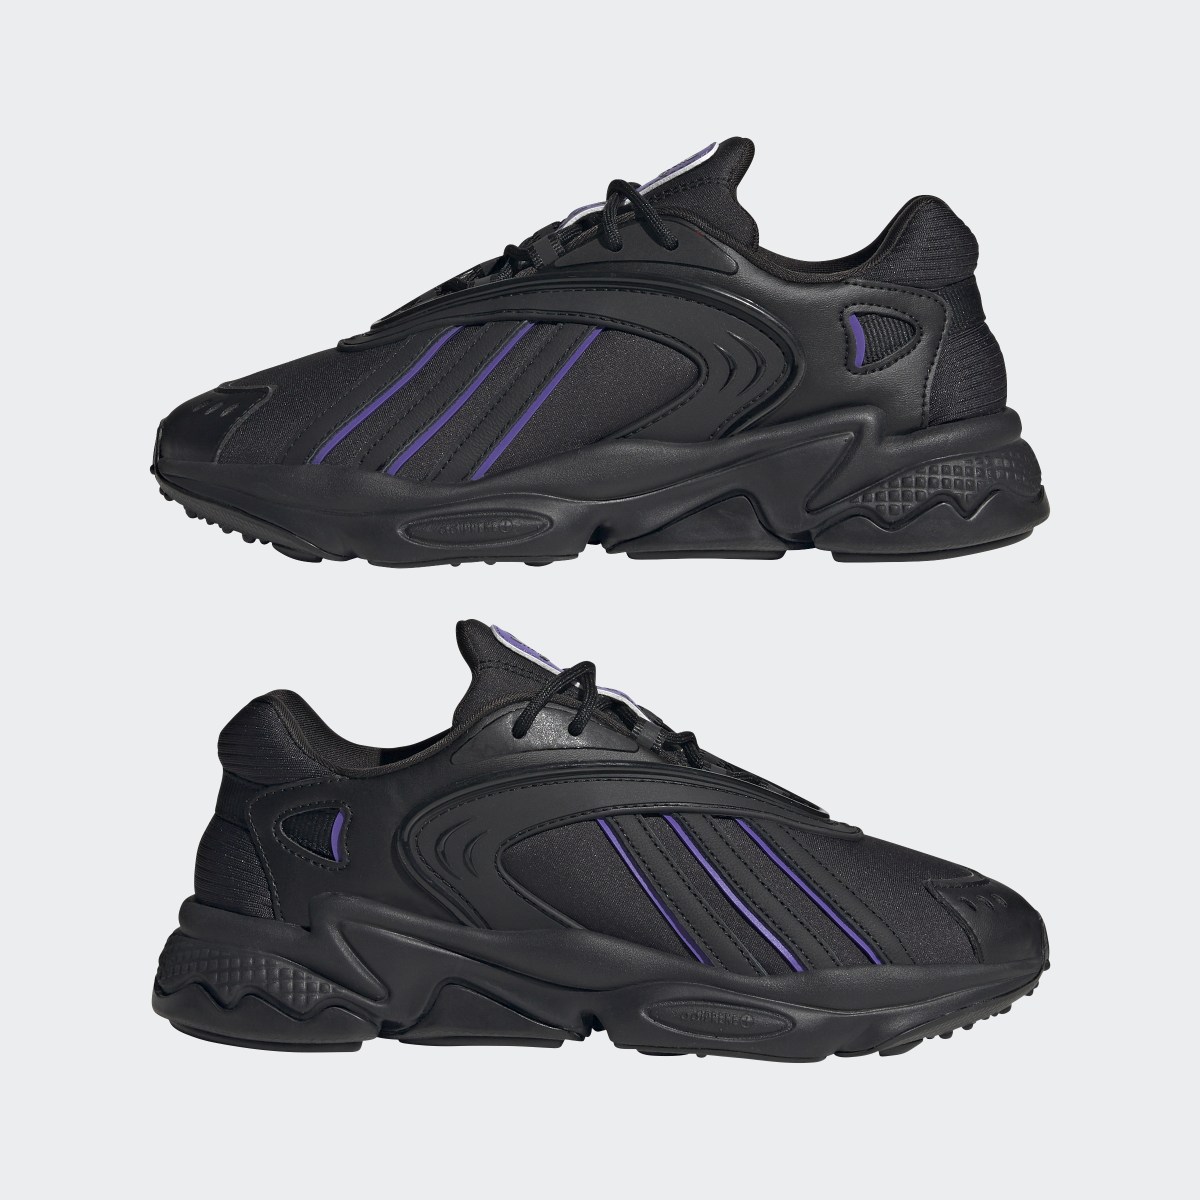 Adidas Oztral Shoes. 11